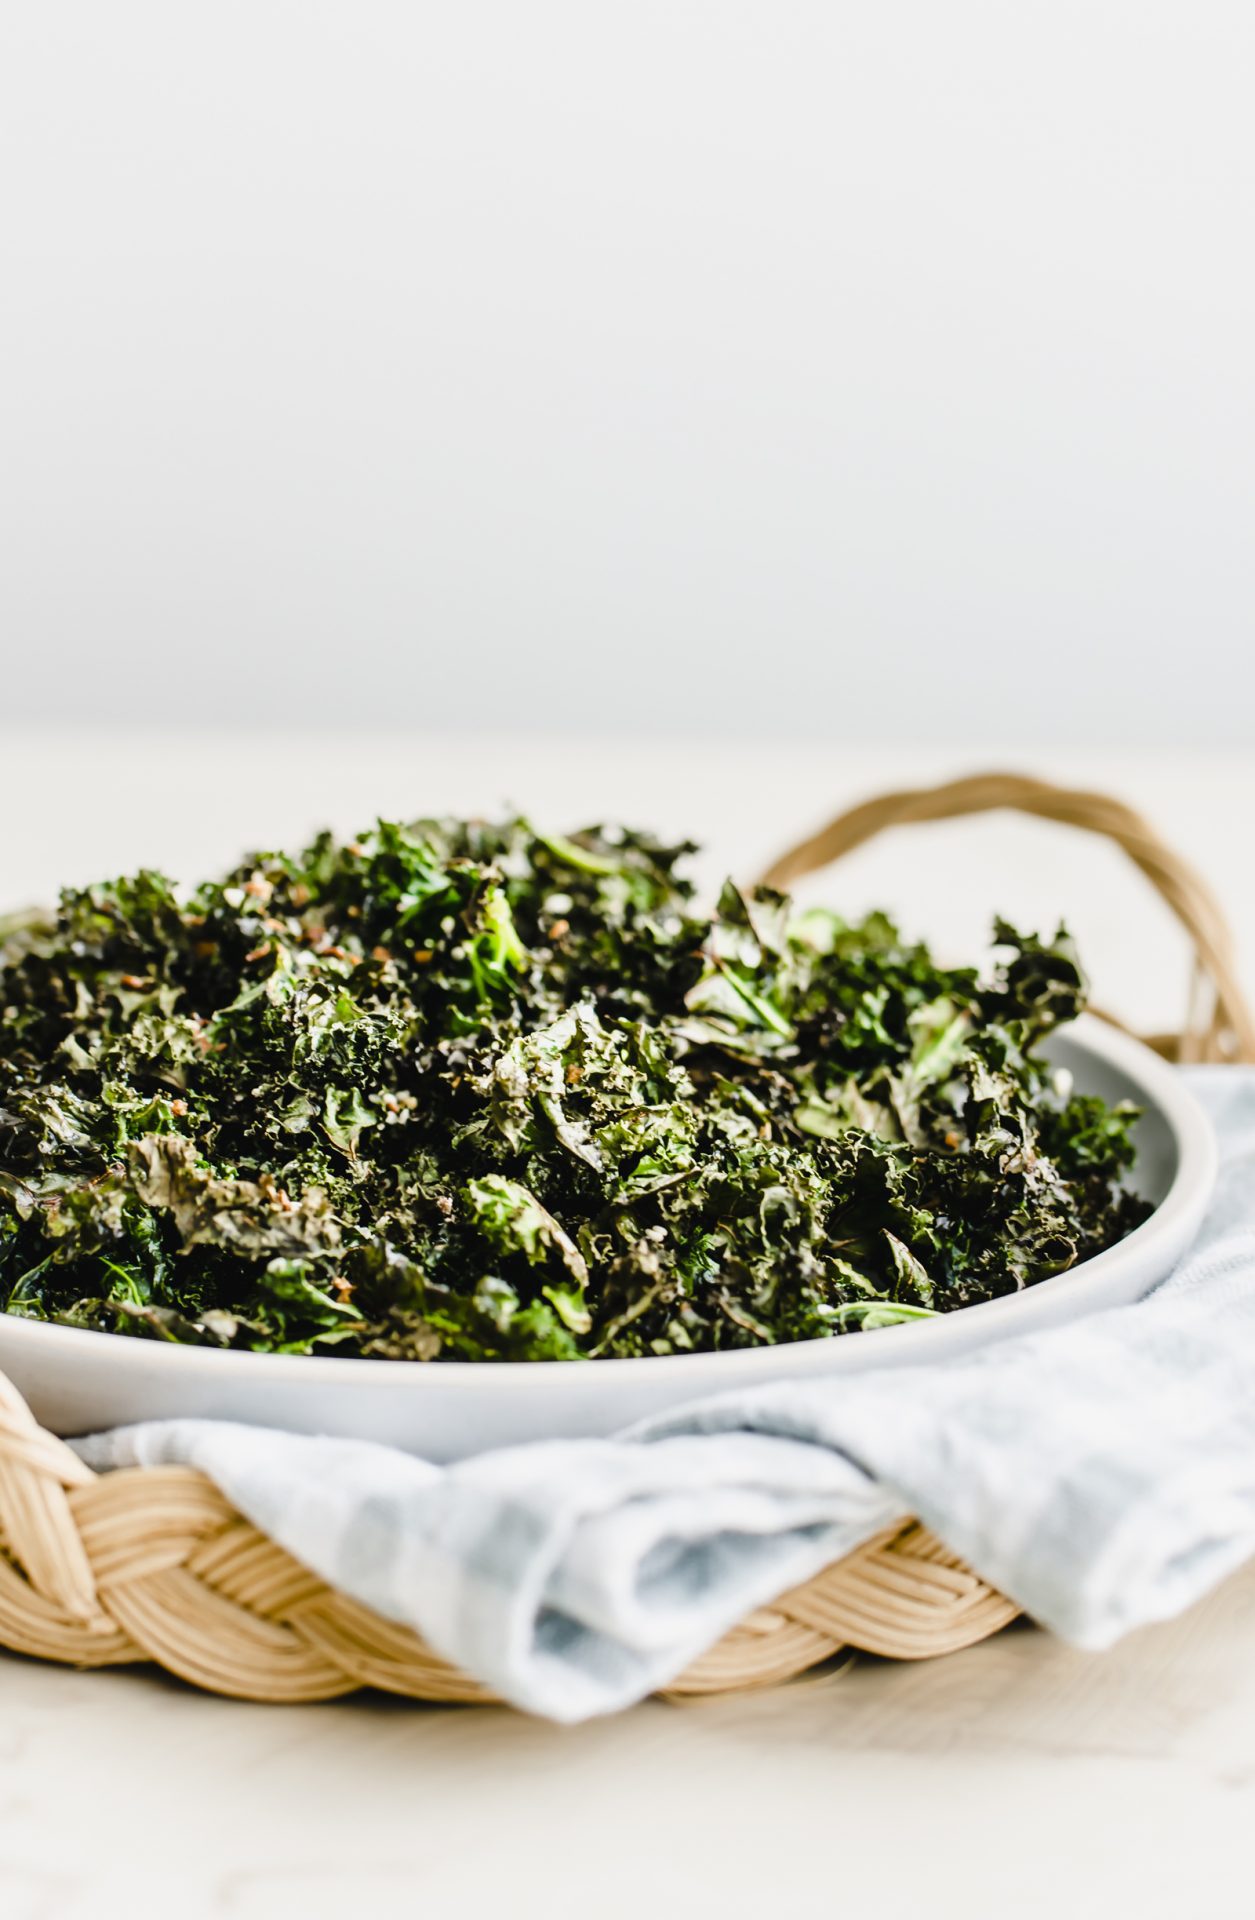 A side shot of a plate of kale chips on a gingham dish towel inside a rattan charger.